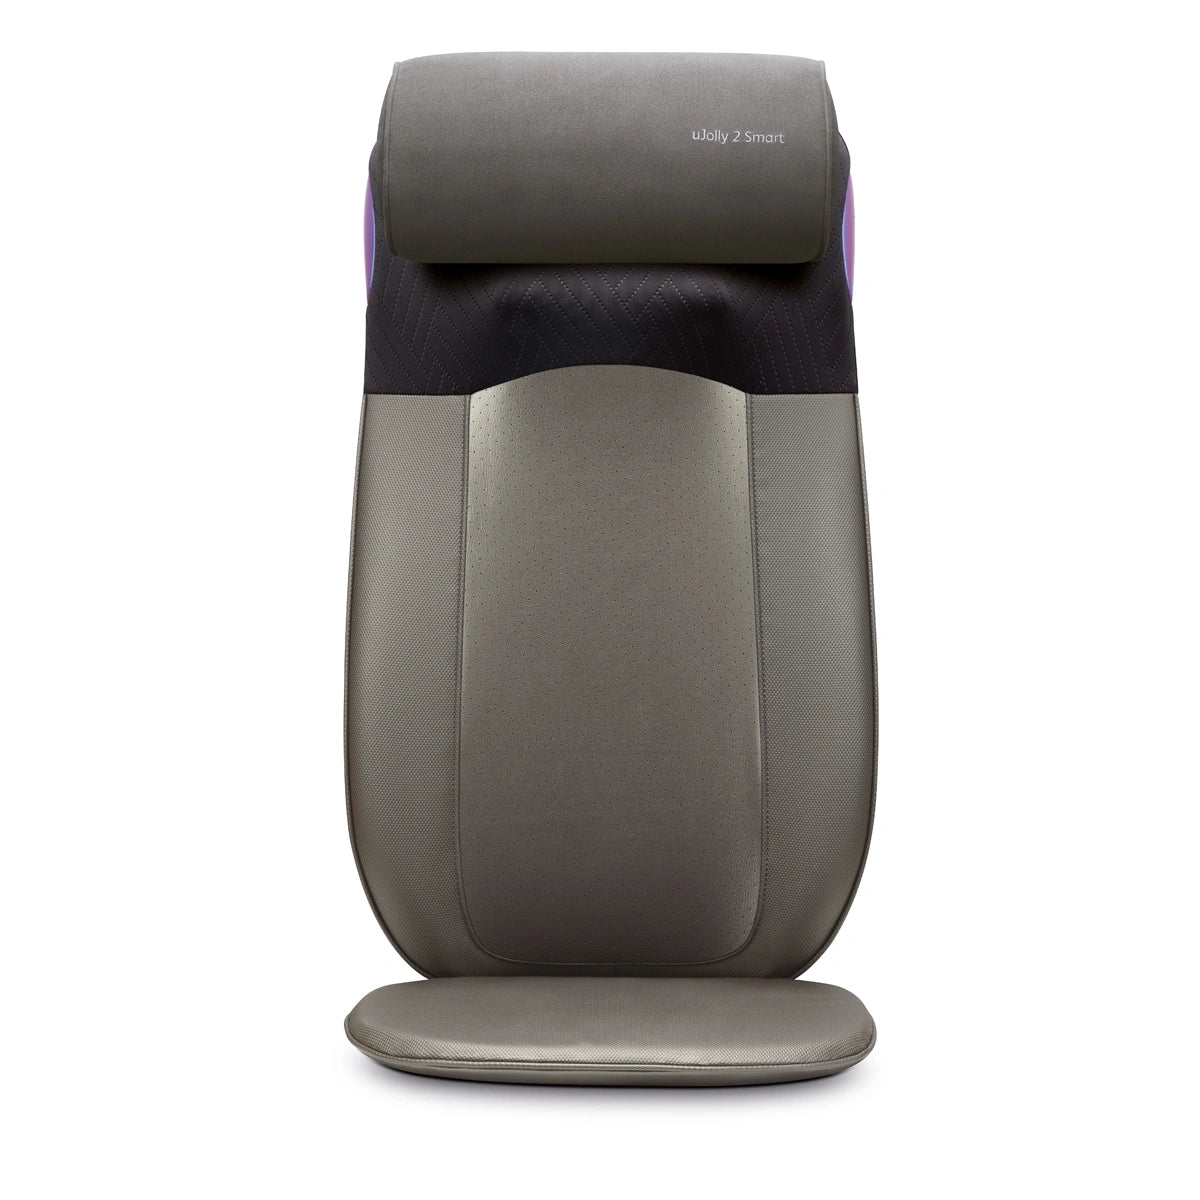 ujolly 2 smart back massager front view image